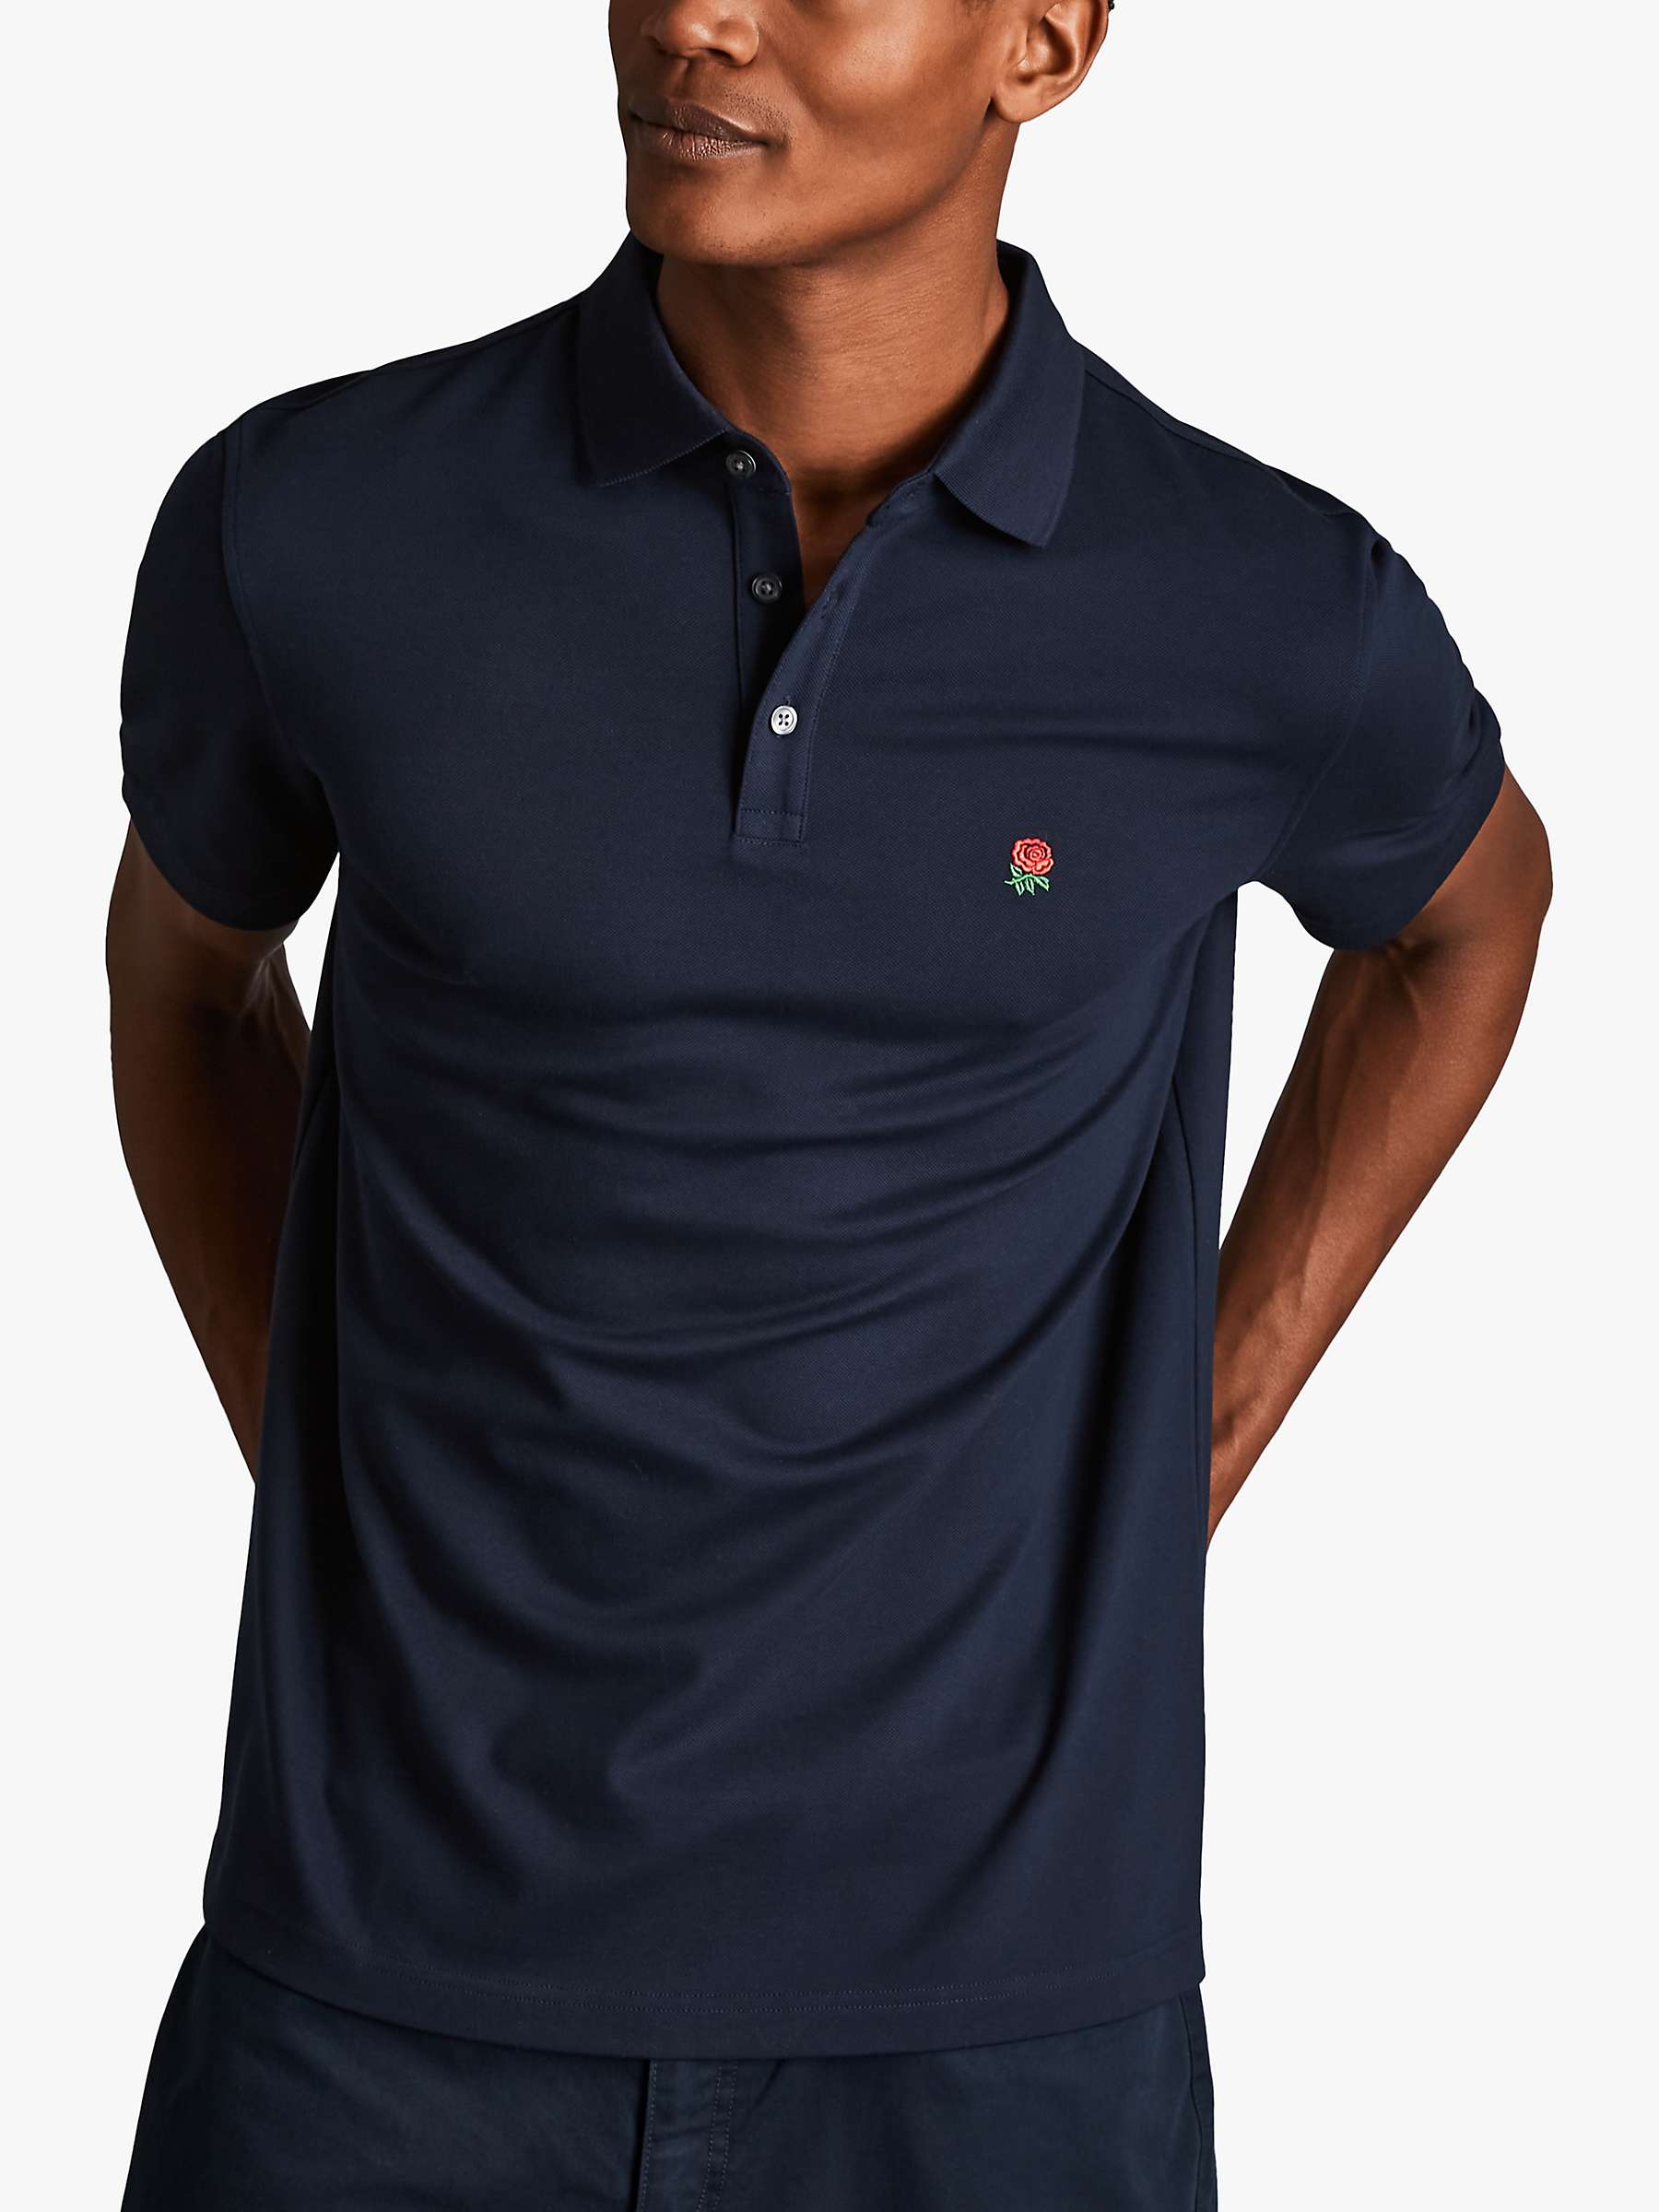 Buy Charles Tyrwhitt England Rugby Pique Polo Shirt Online at johnlewis.com